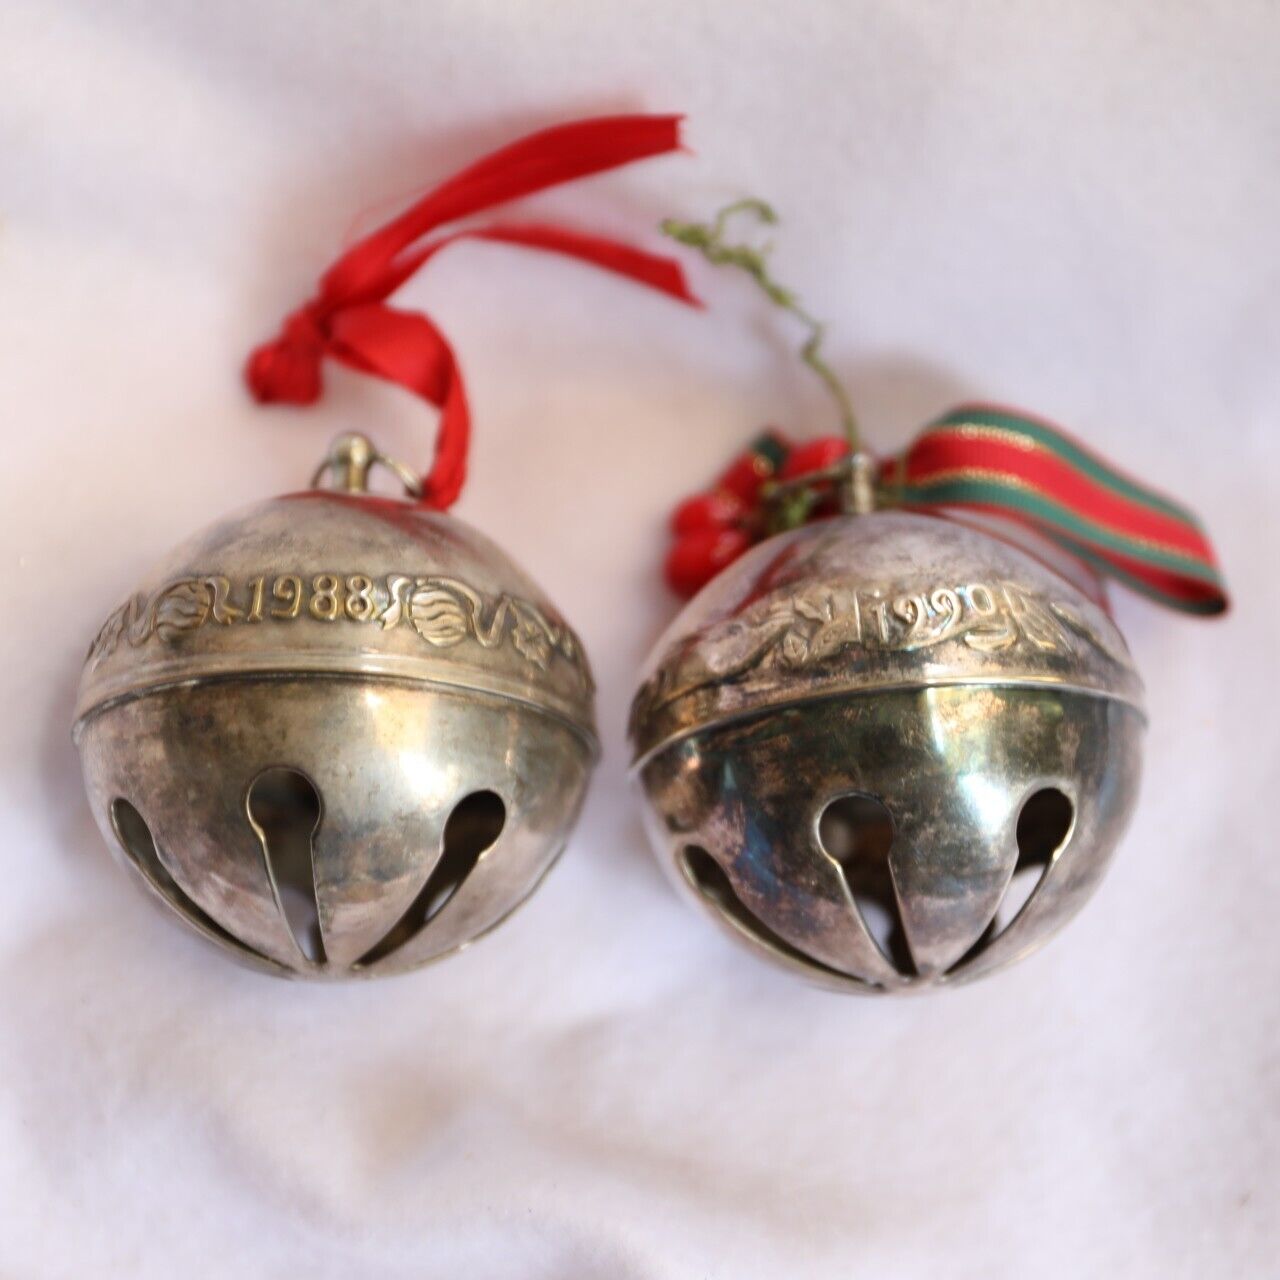 Wallace Silversmiths Limited Edition 1988 Annual Christmas Sleigh Bell SET OF 2